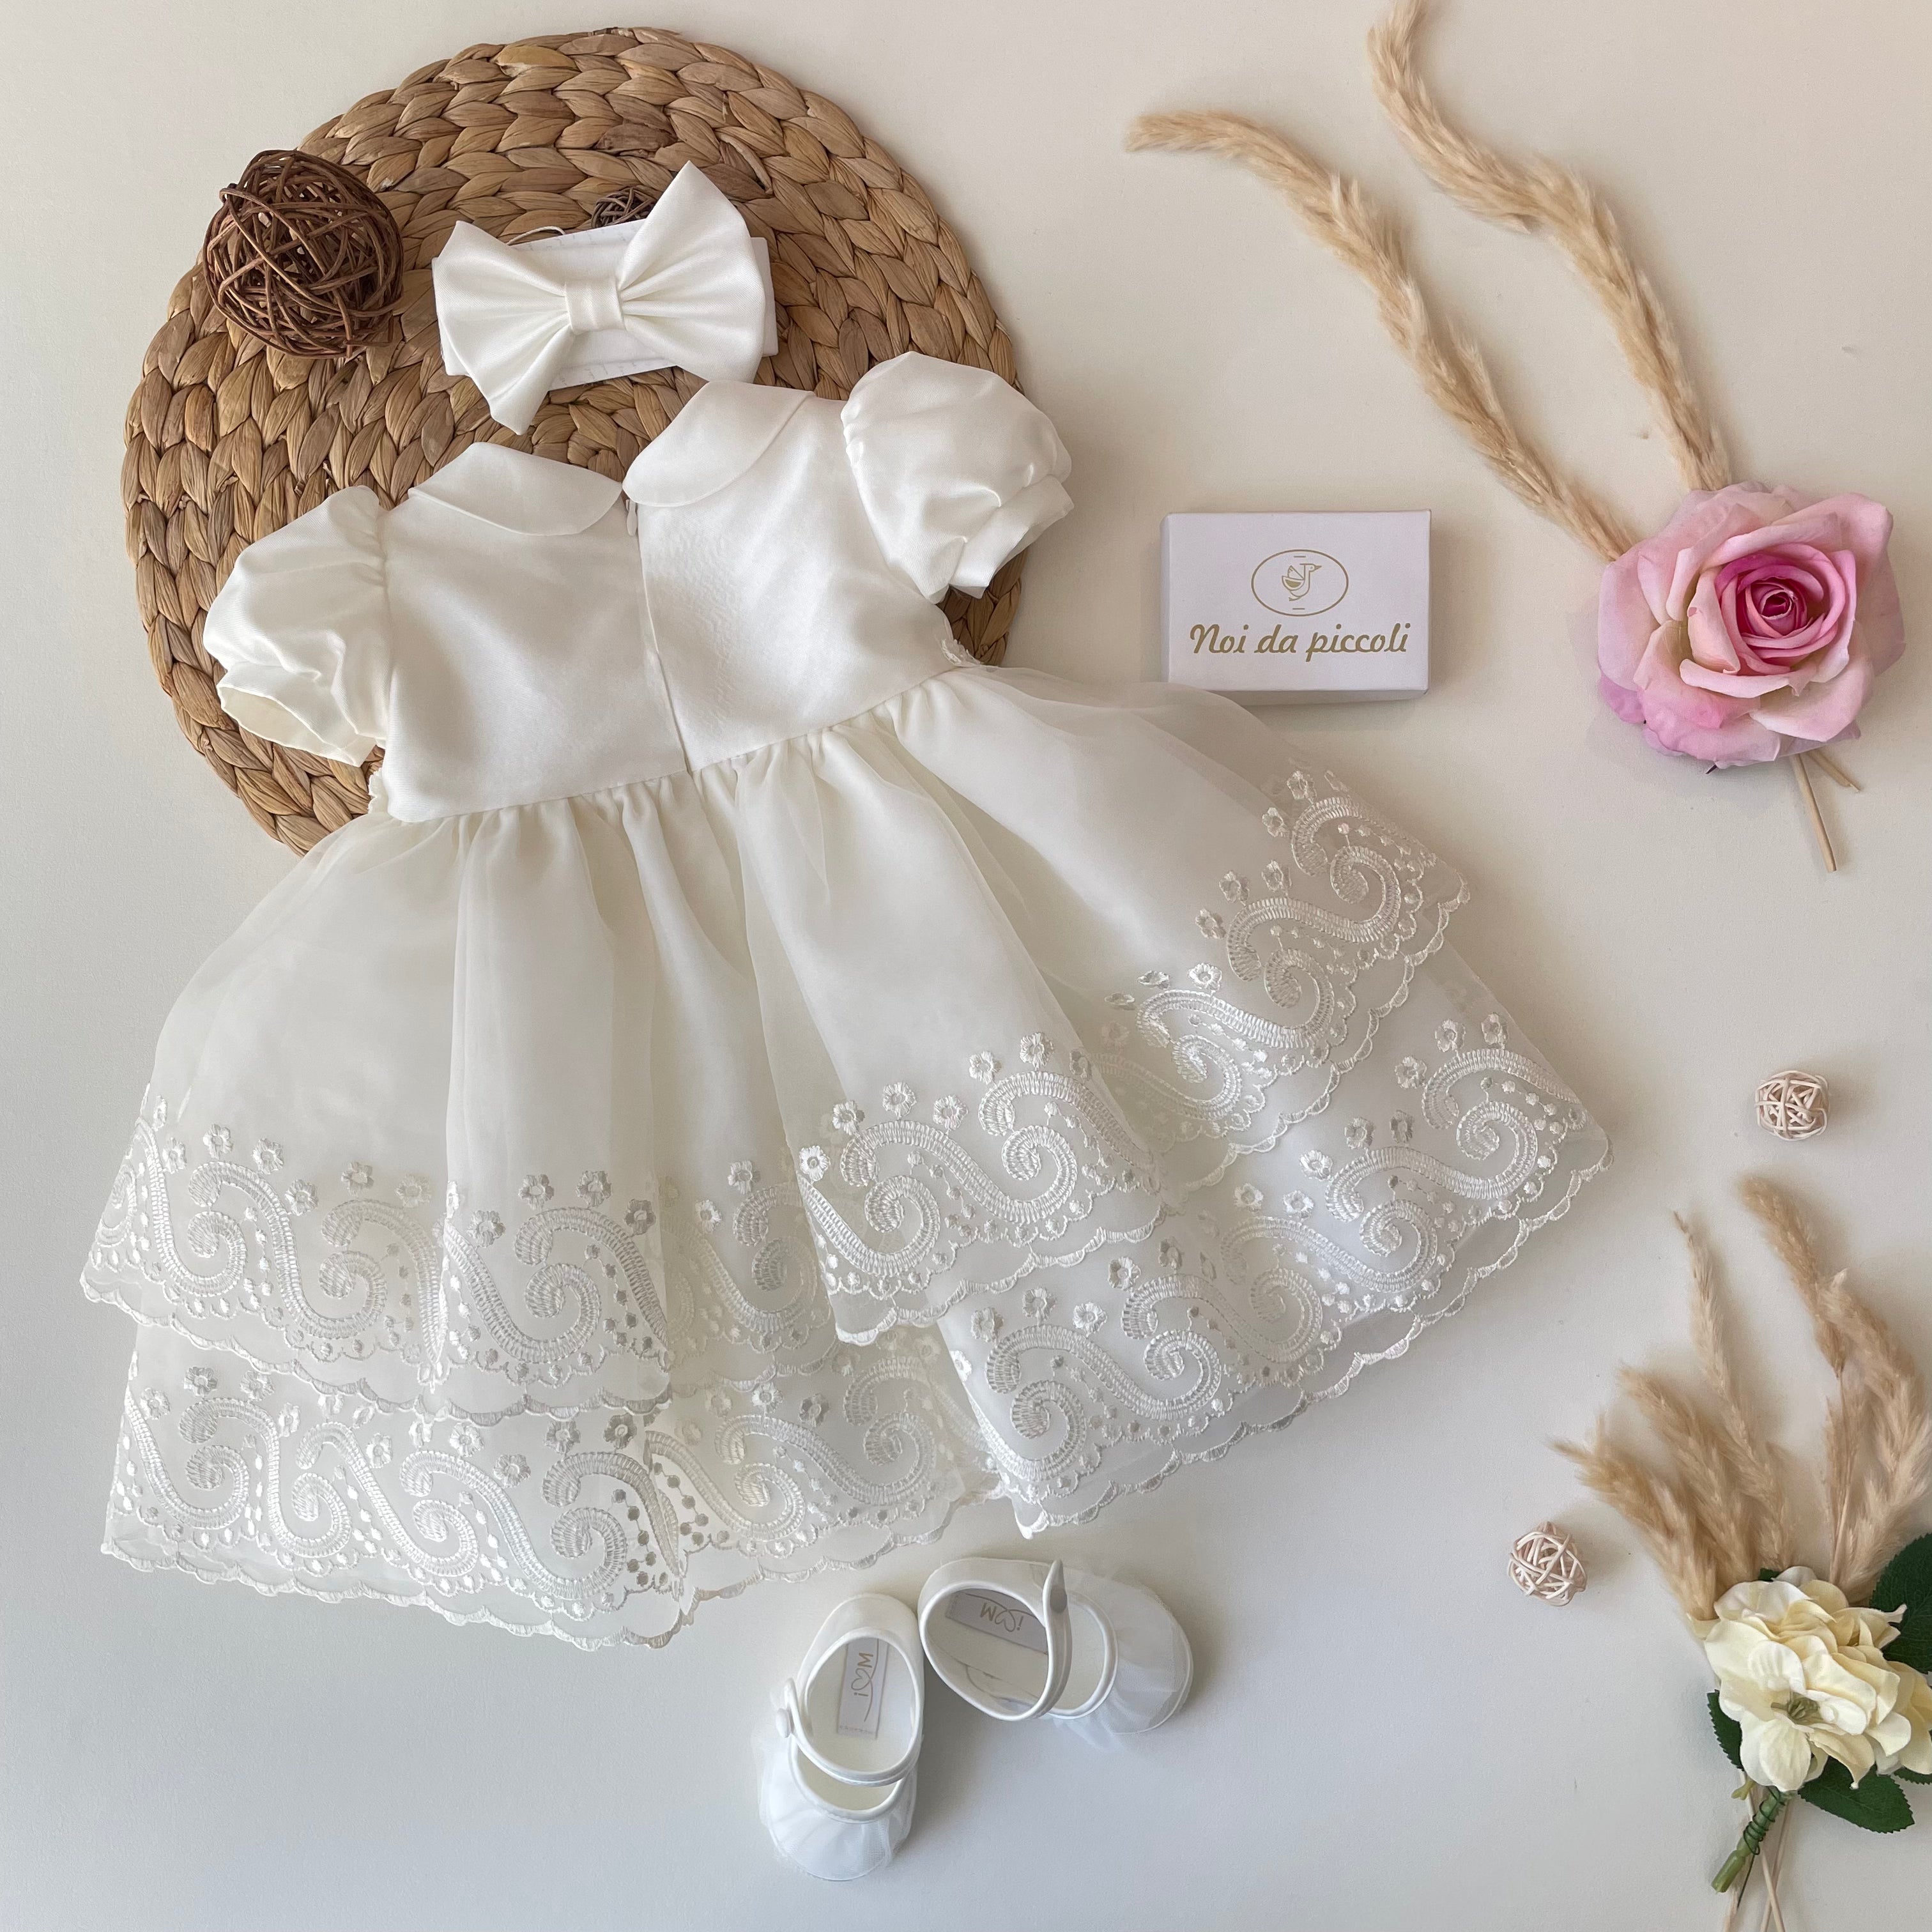 WHITE AND LACE CEREMONY DRESS